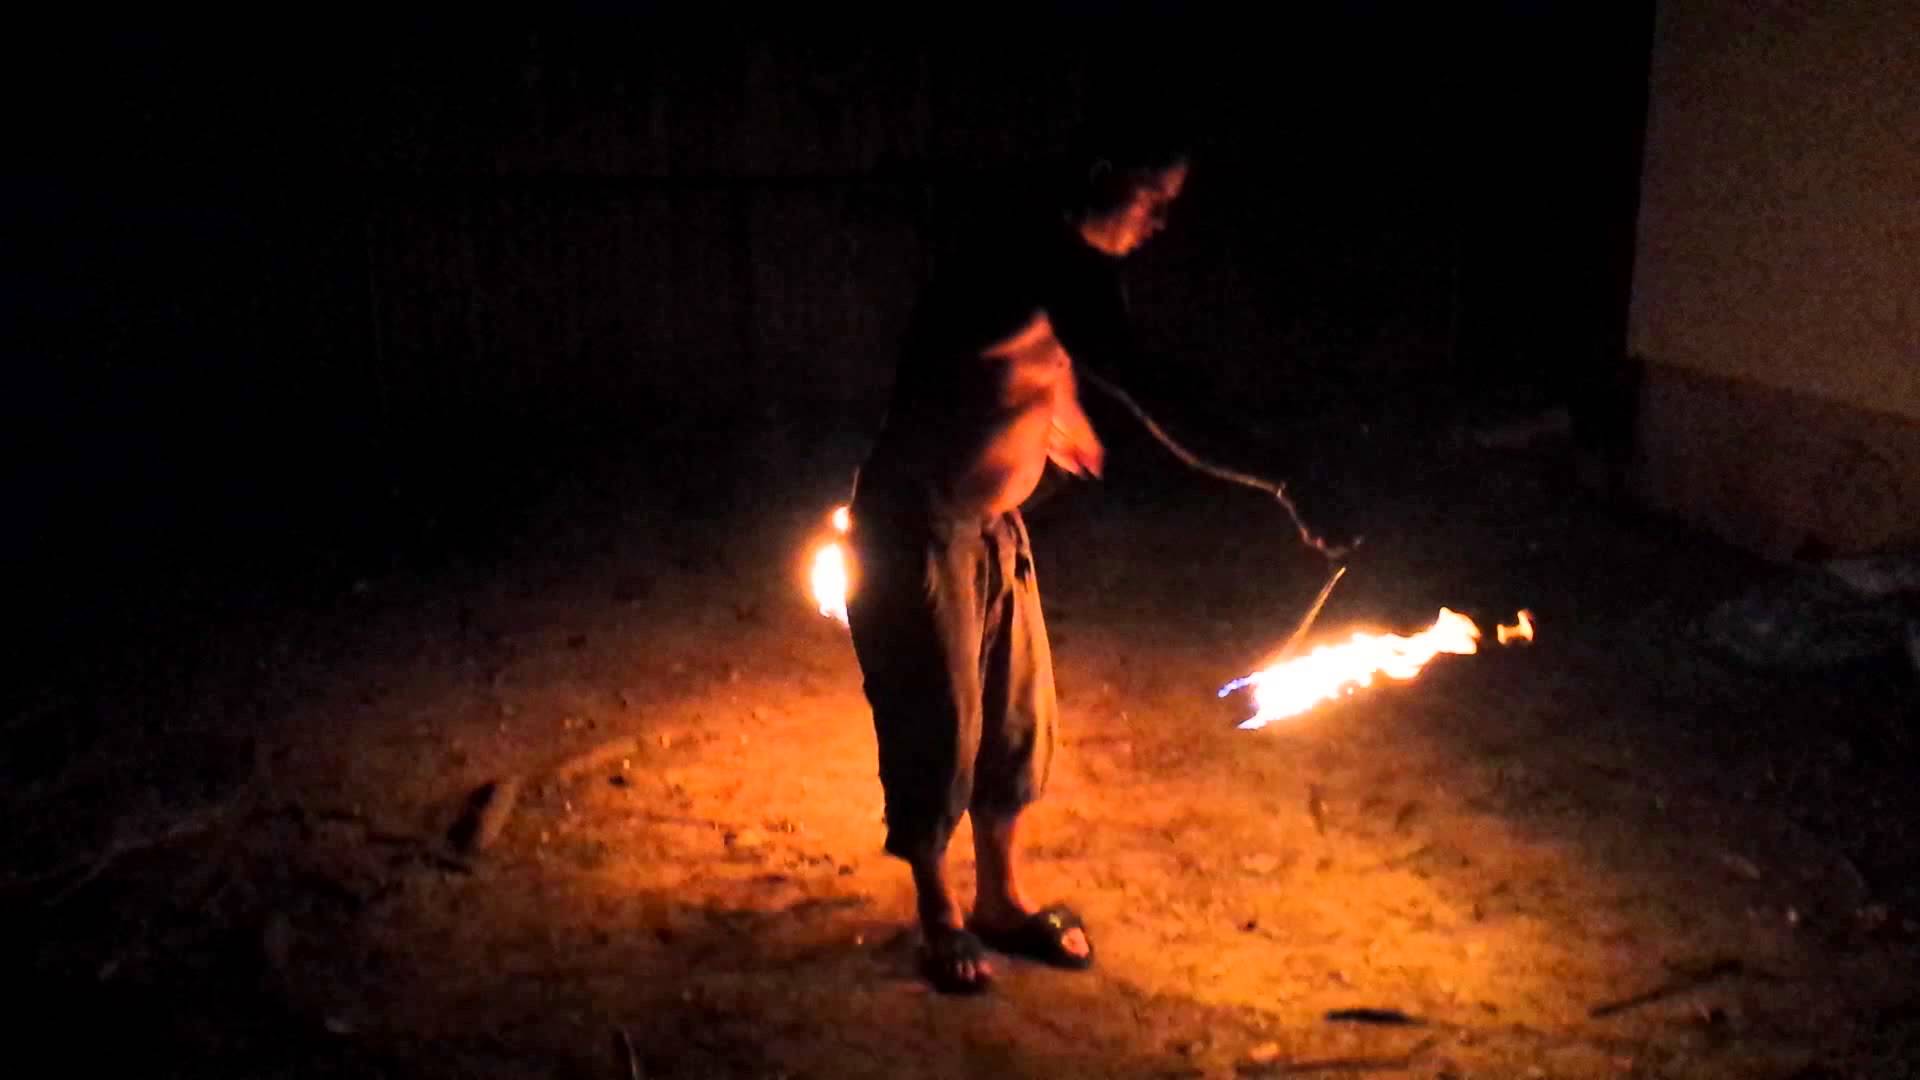 Fireballs spinning on a rope - YouTube